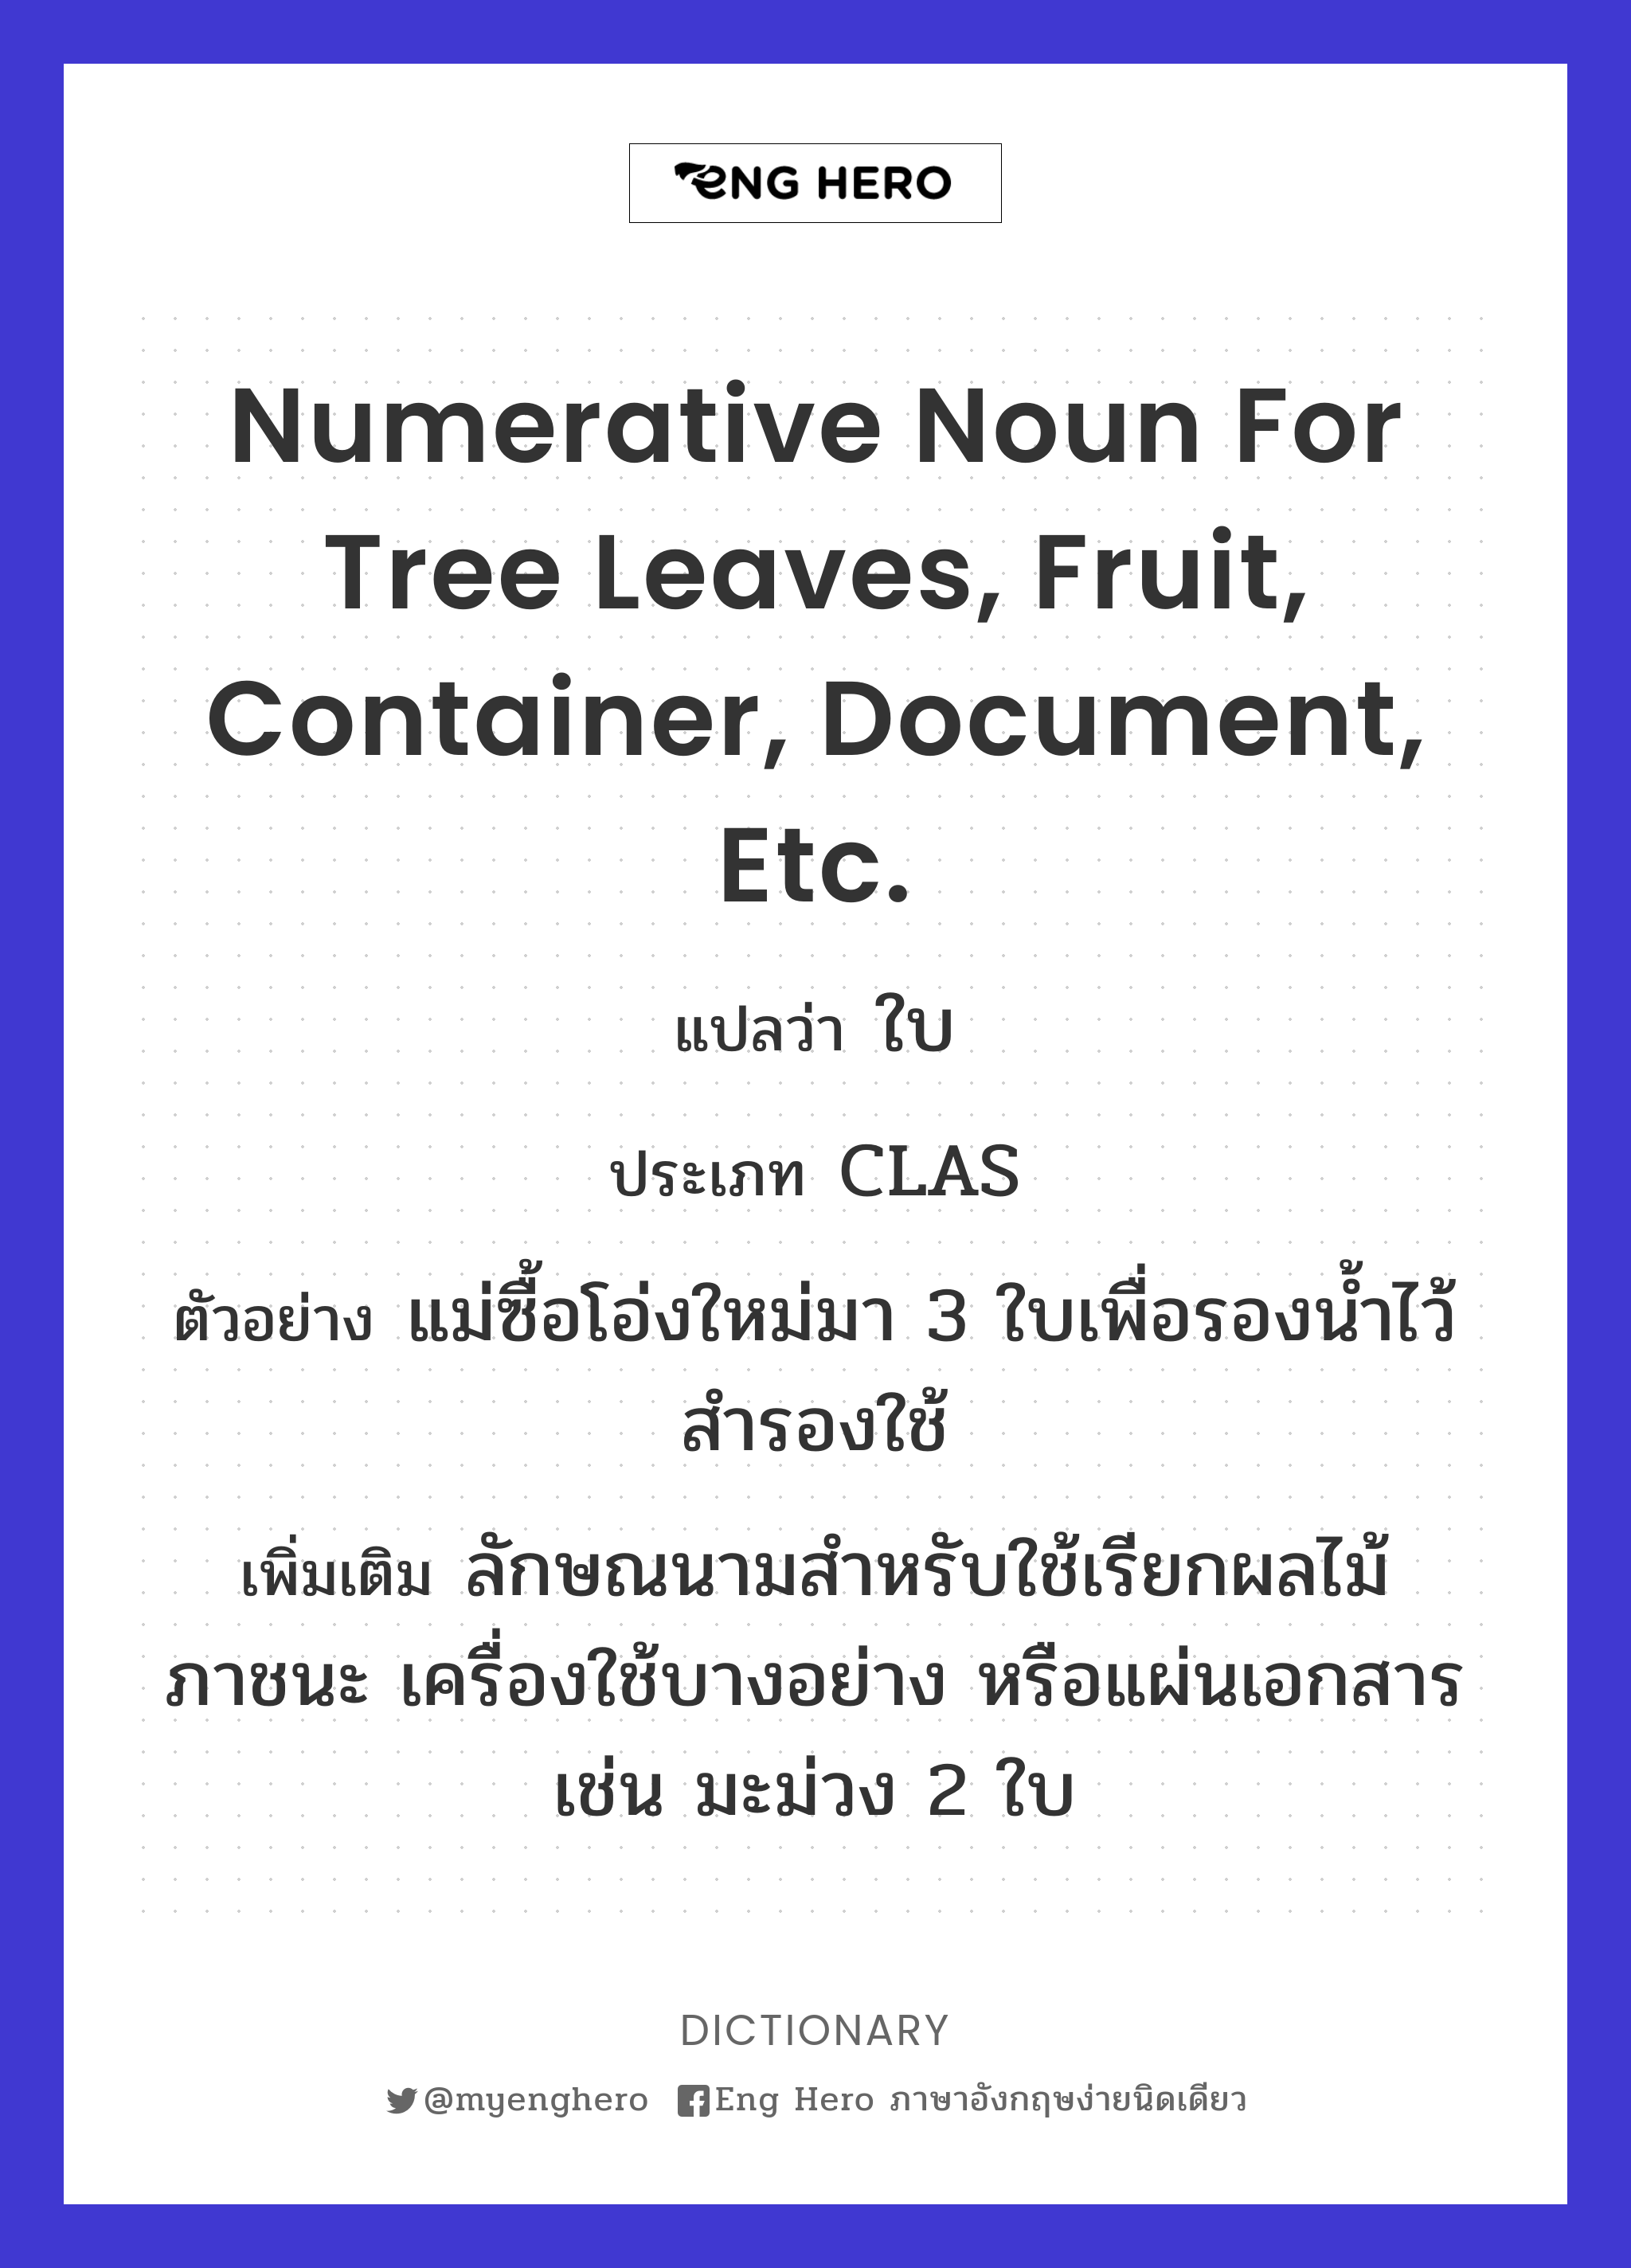 numerative noun for tree leaves, fruit, container, document, etc.